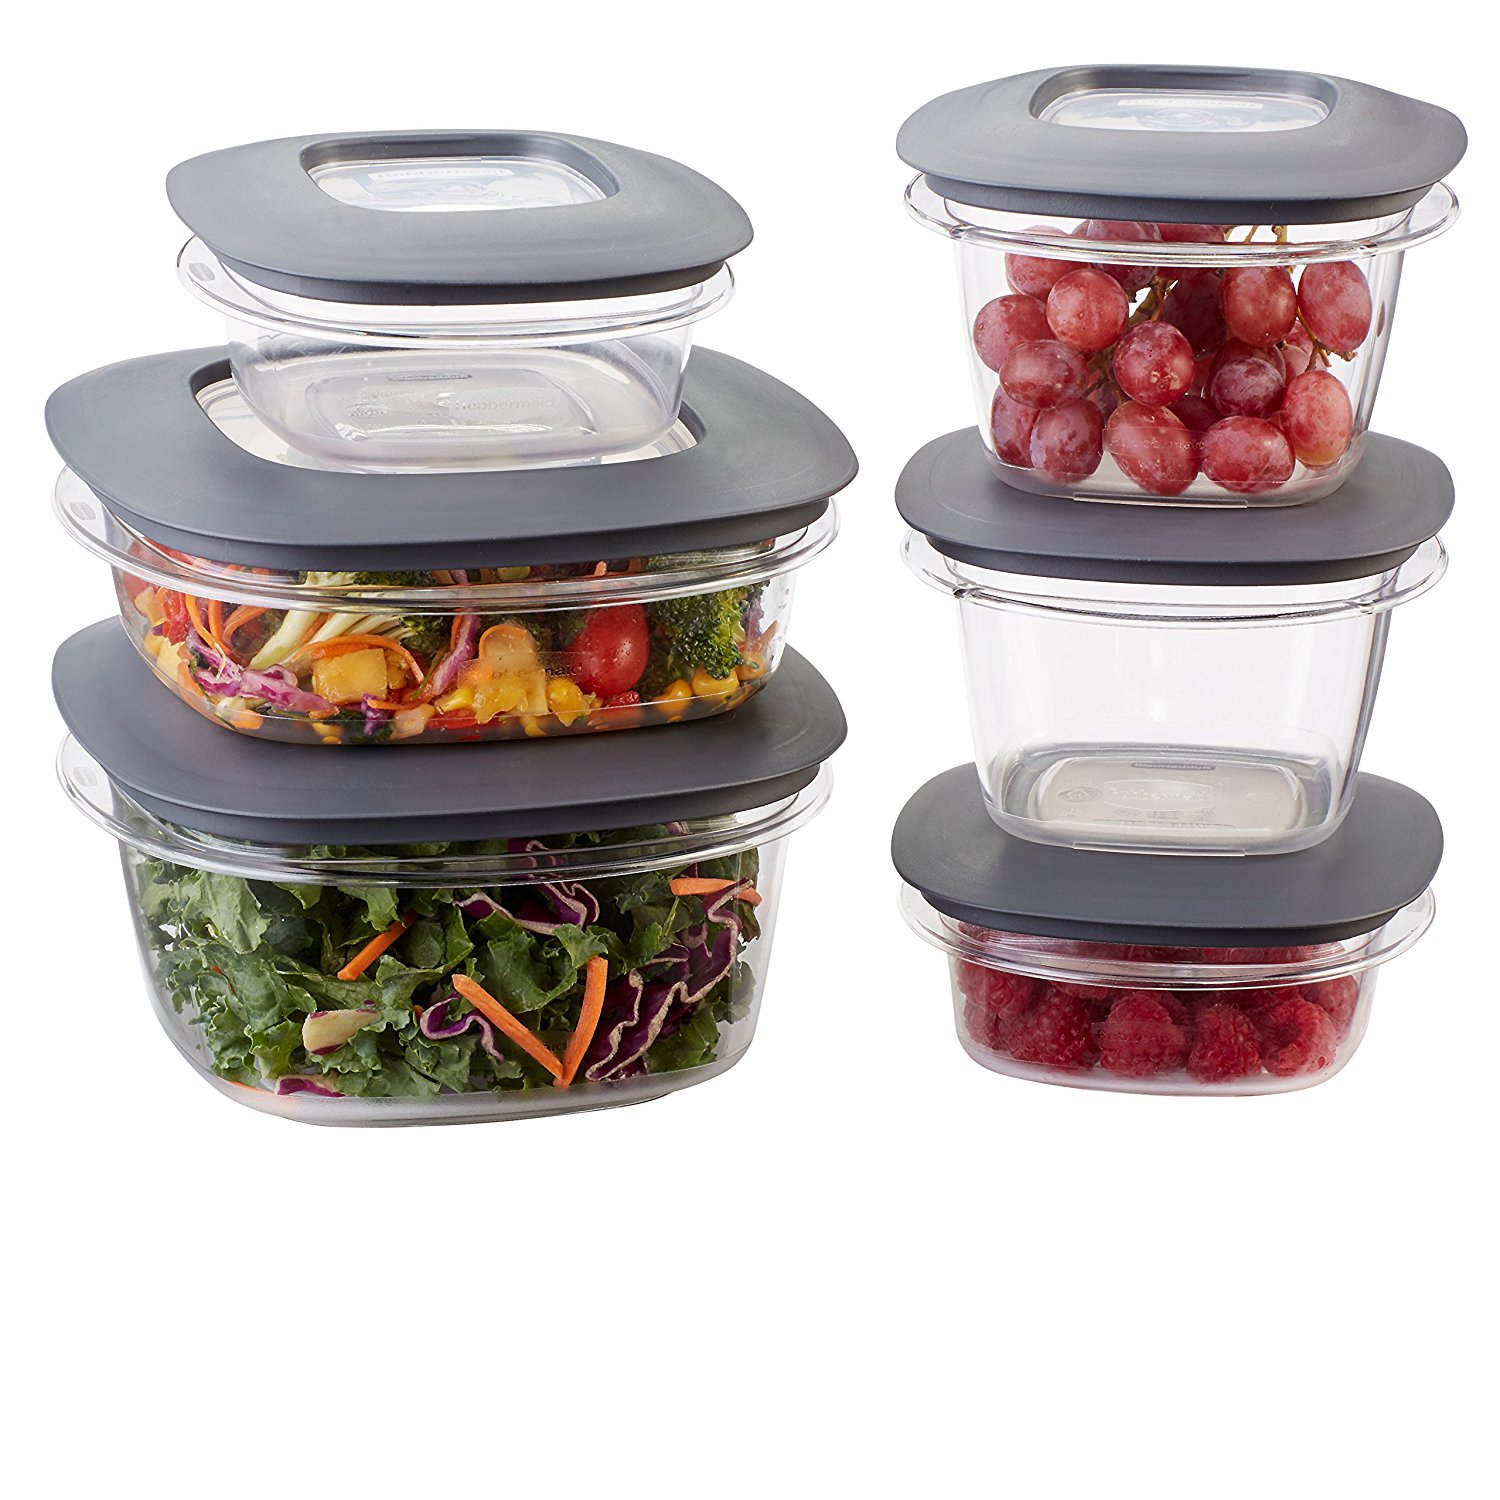 Rubbermaid Premier Food Storage Containers, 12-Piece Set – Just $14.77!